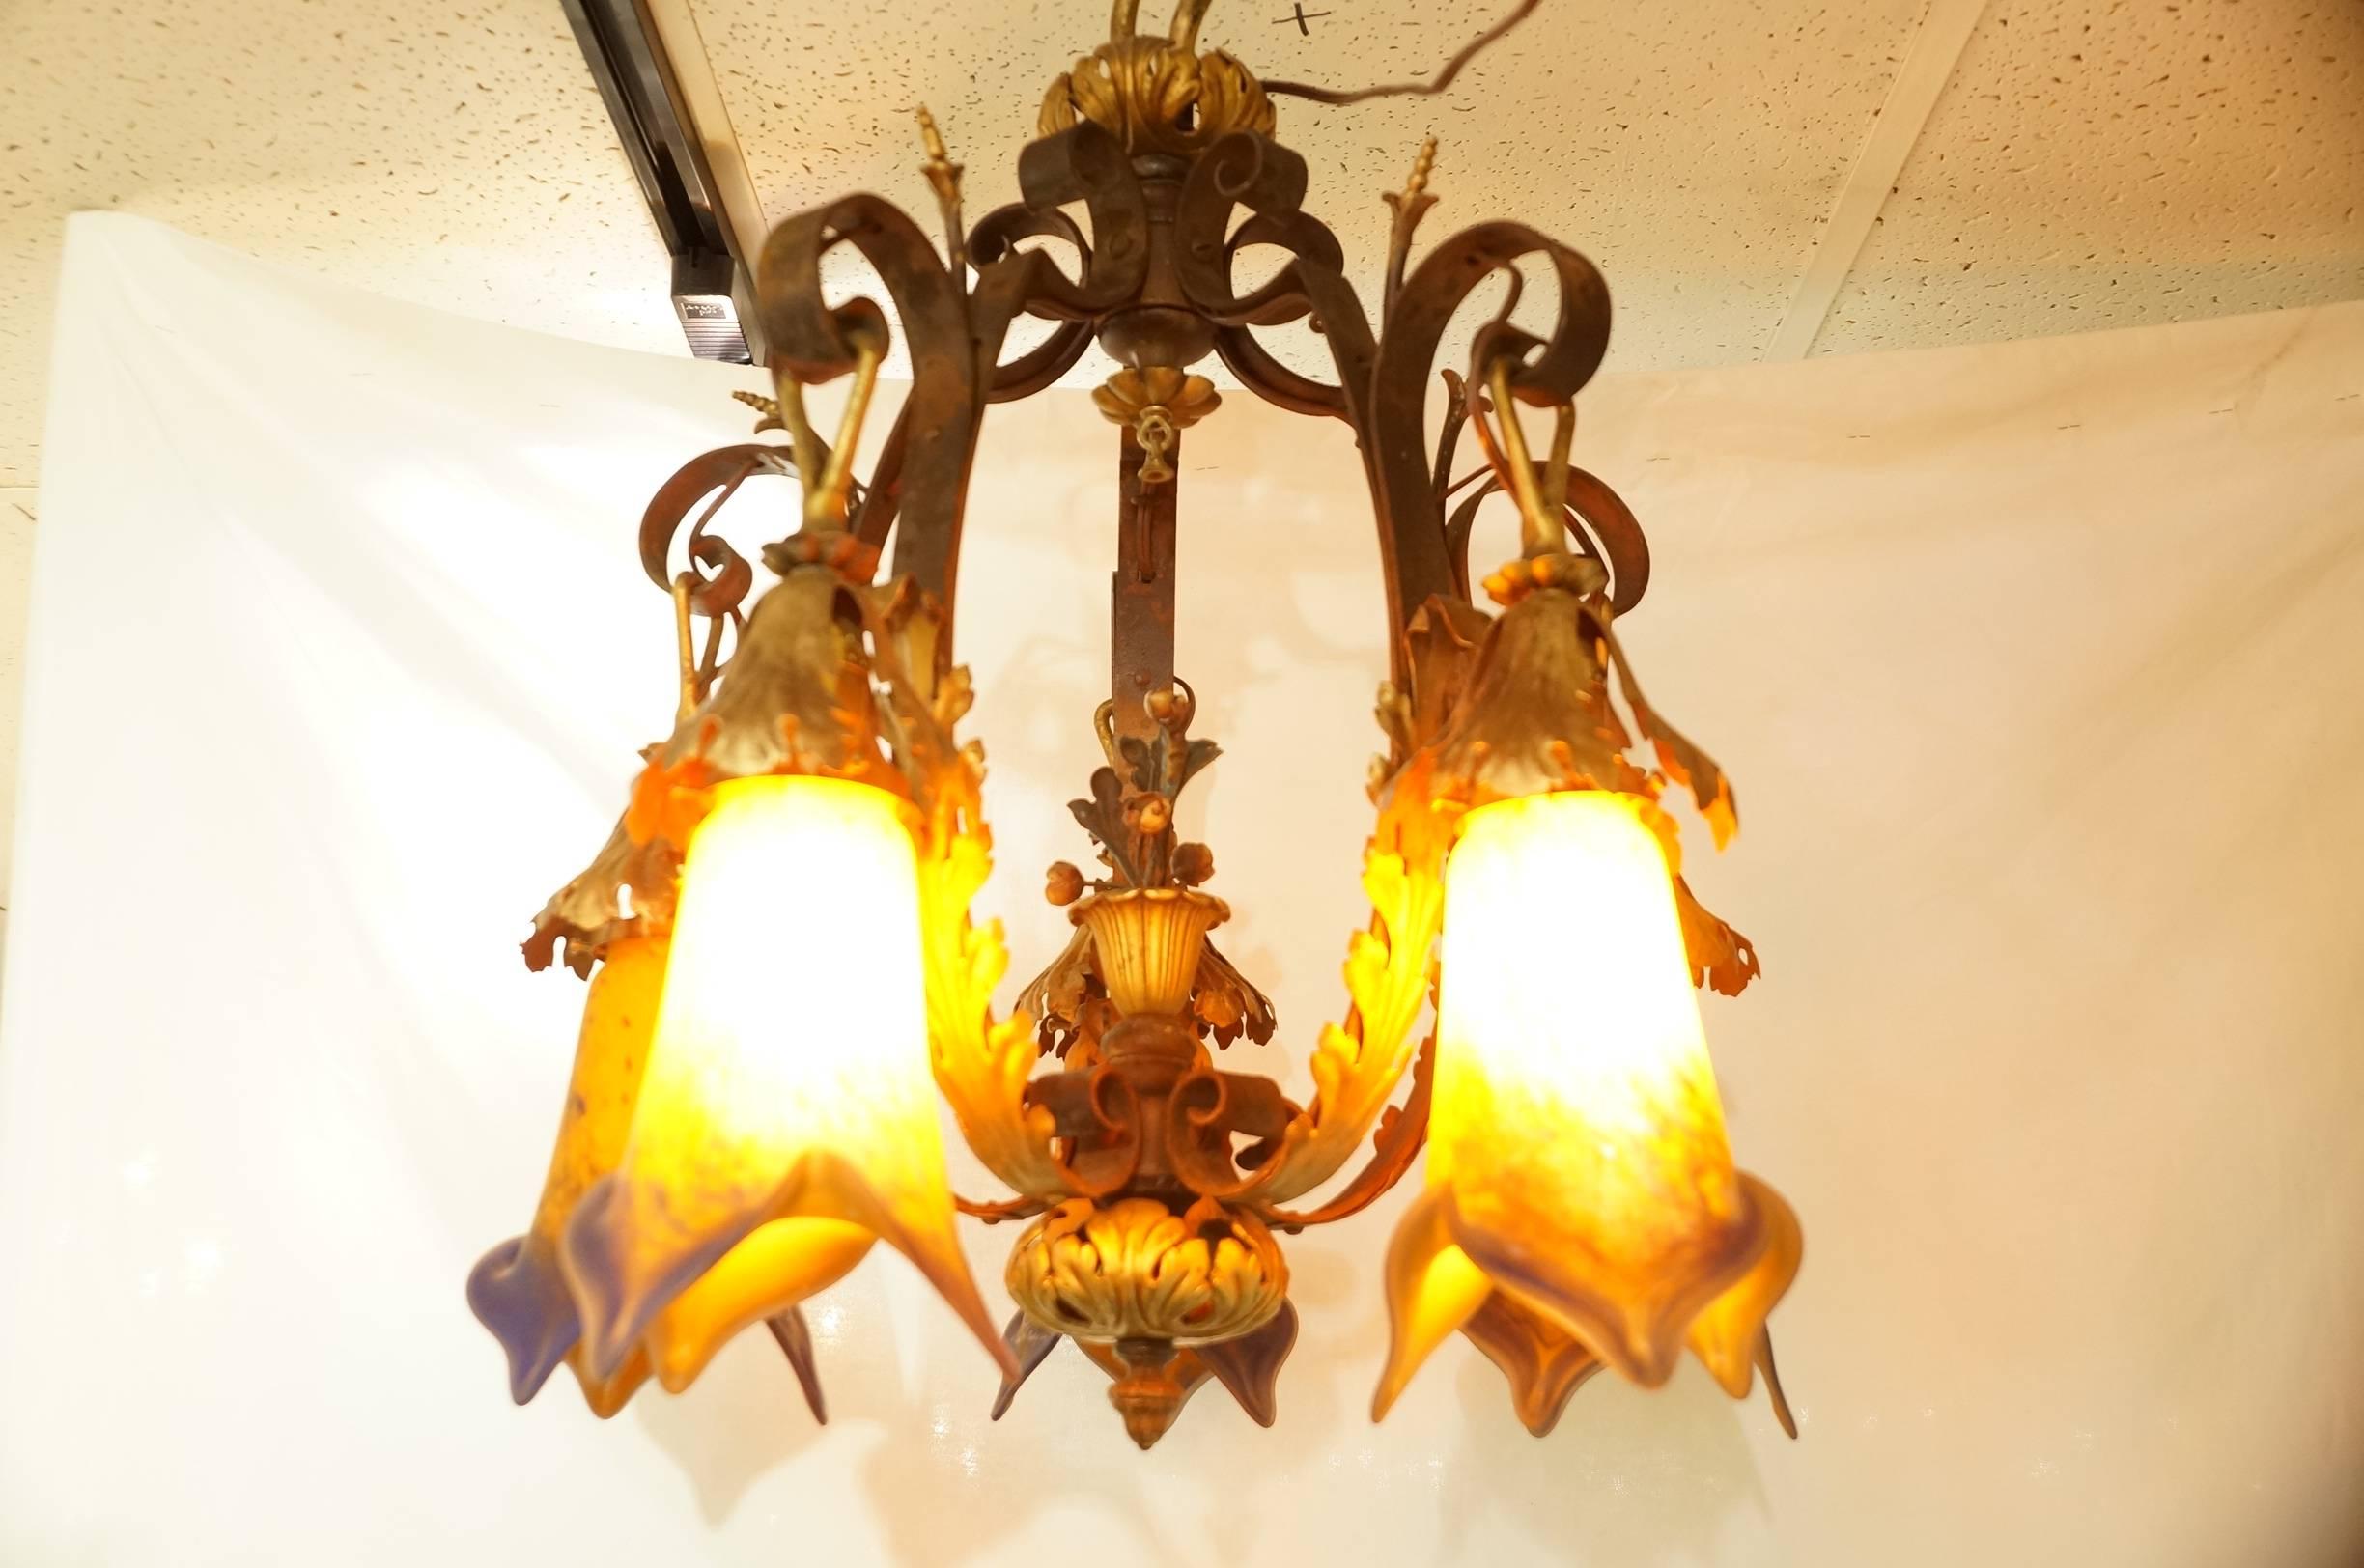 An Art Nouveau 5 Arm Bronze Chandelier with Colored Glass Shades in Daum Nancy Style
Stock Number: L376